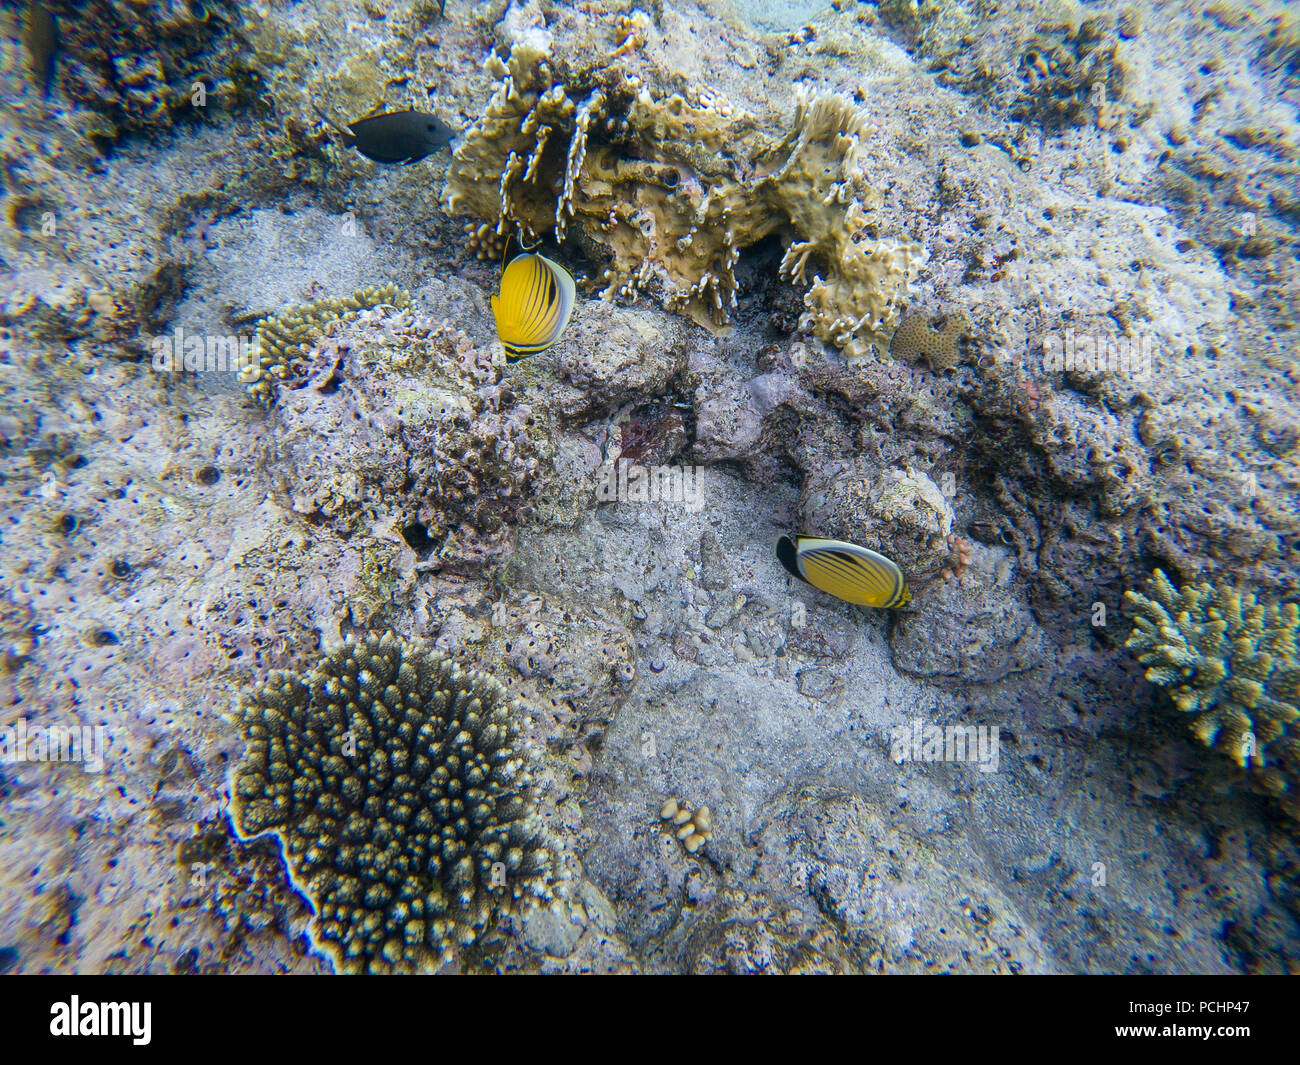 Fish and coral: Red Sea Raccoon Butterflyfish (Pantodon buchholzi) on a coral reef Stock Photo